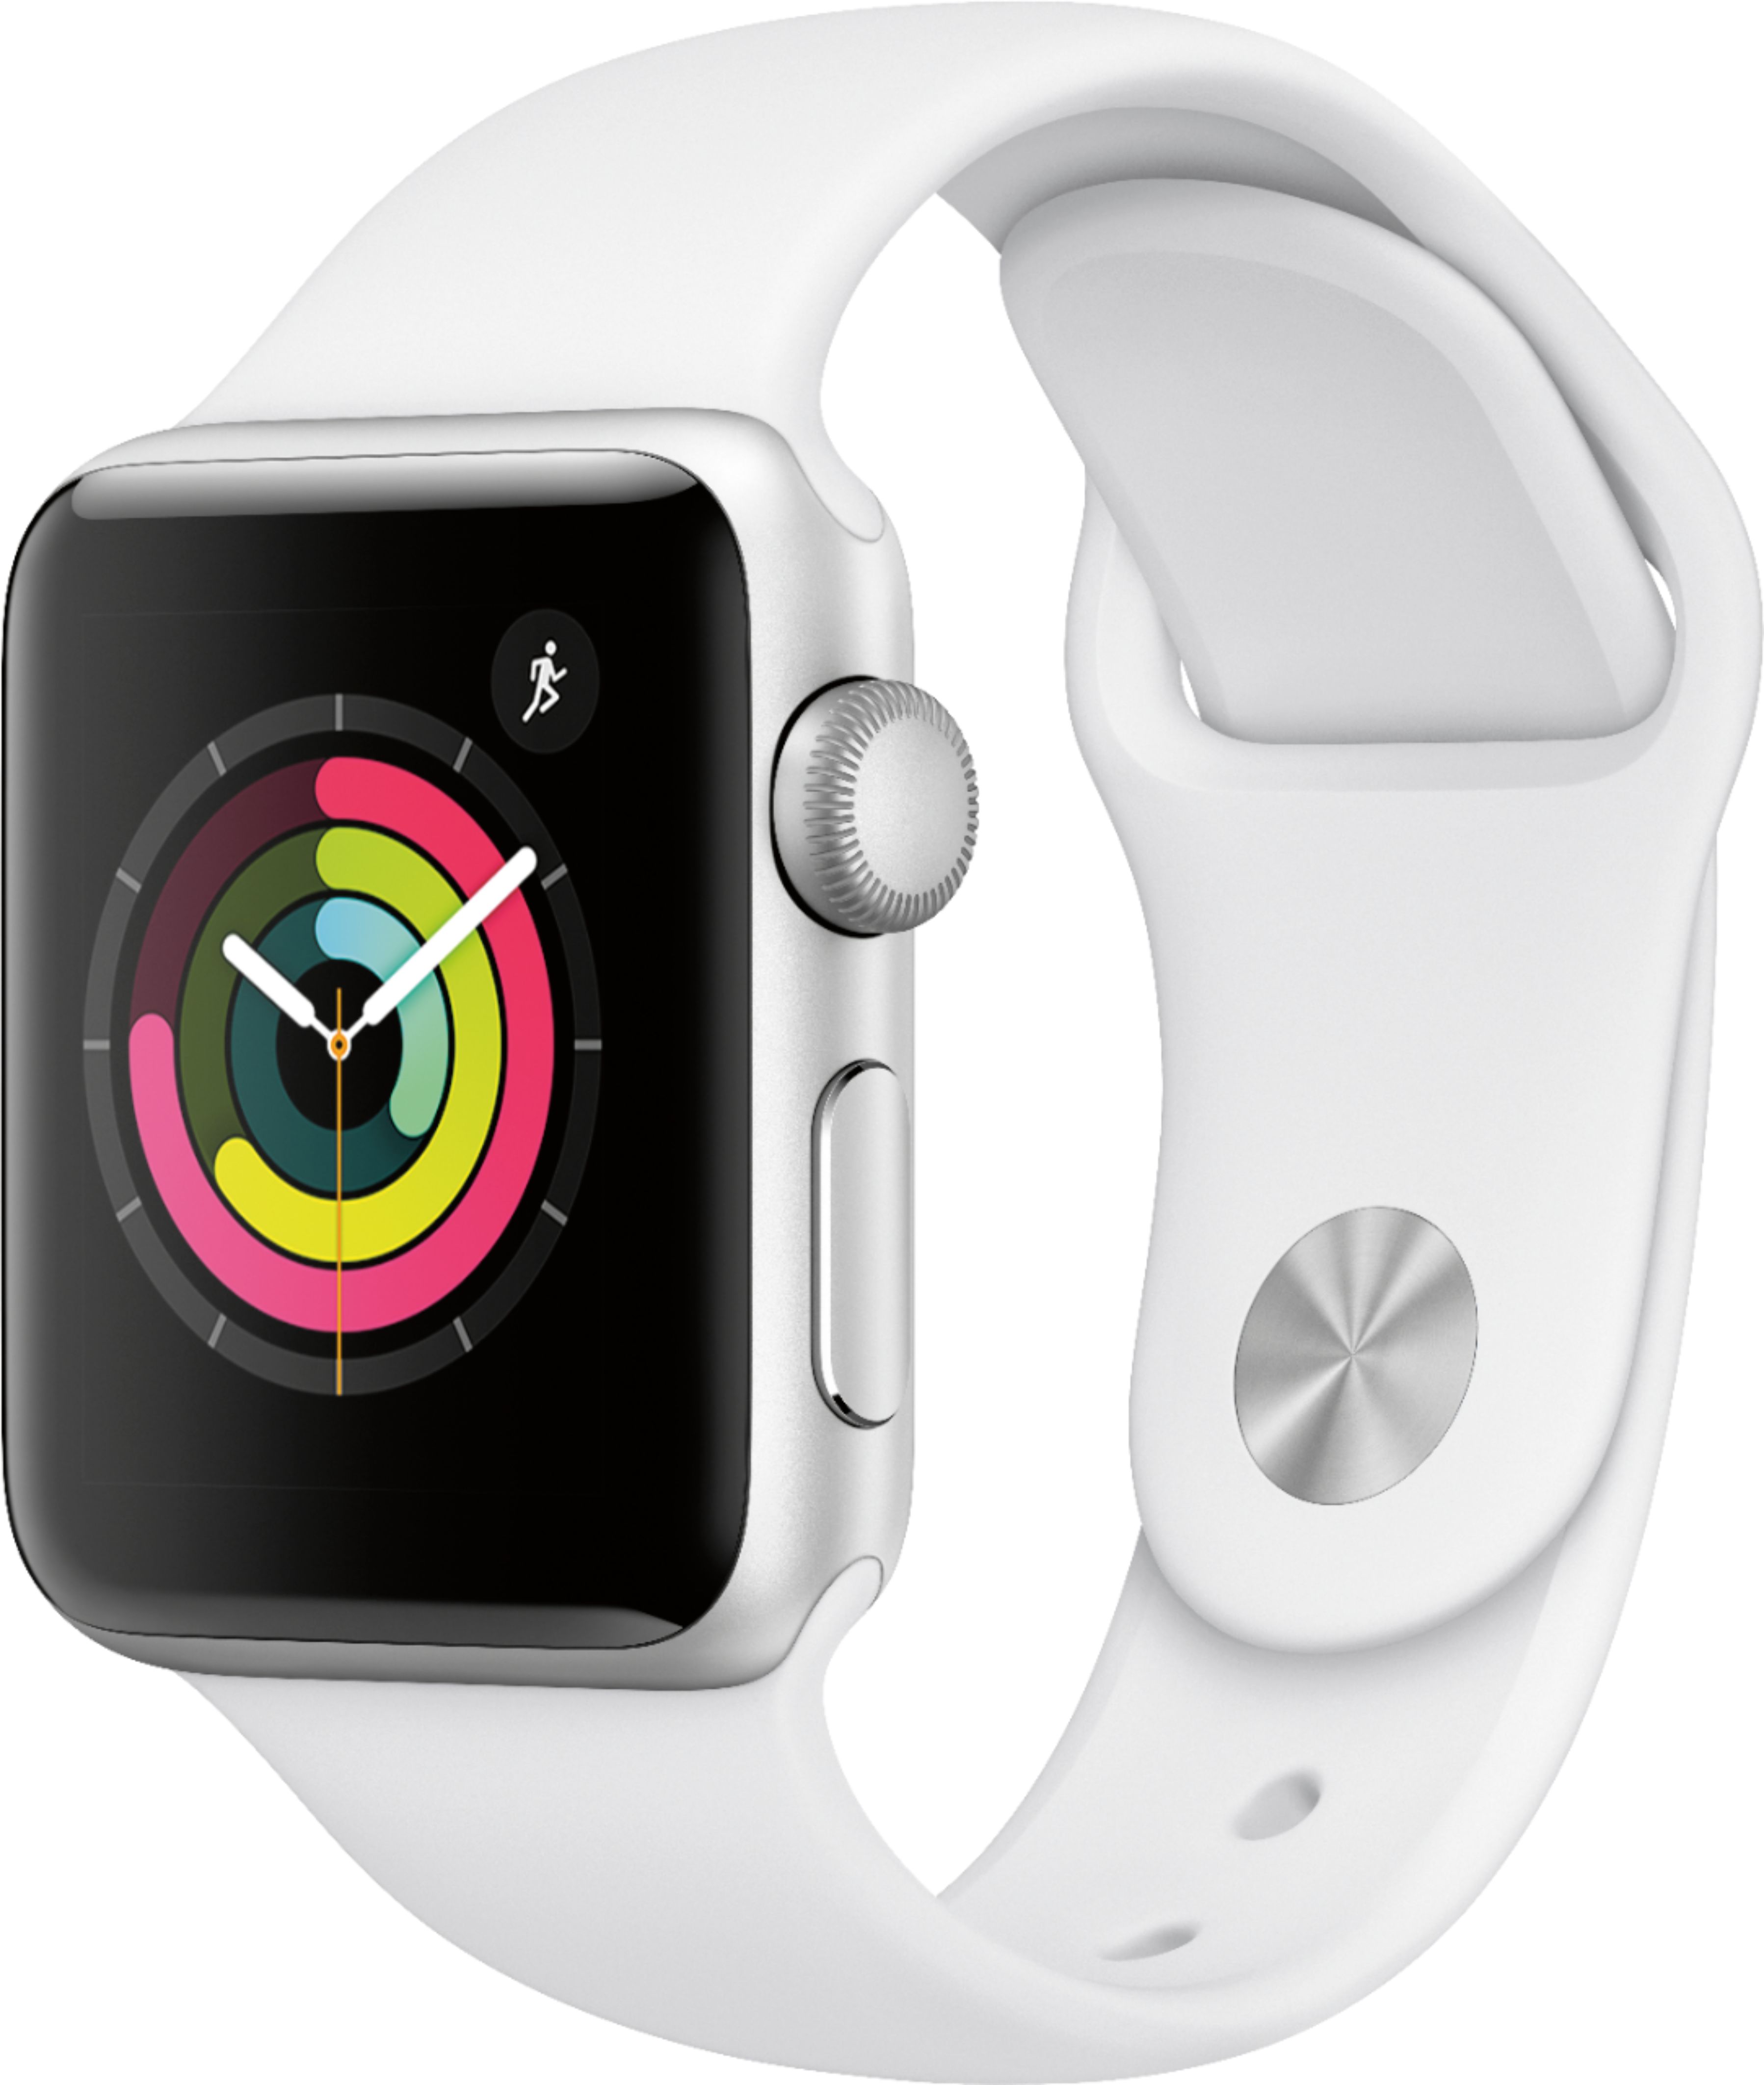 Apple Watch Series 3 (GPS) 38mm Case with White Sport Band Silver